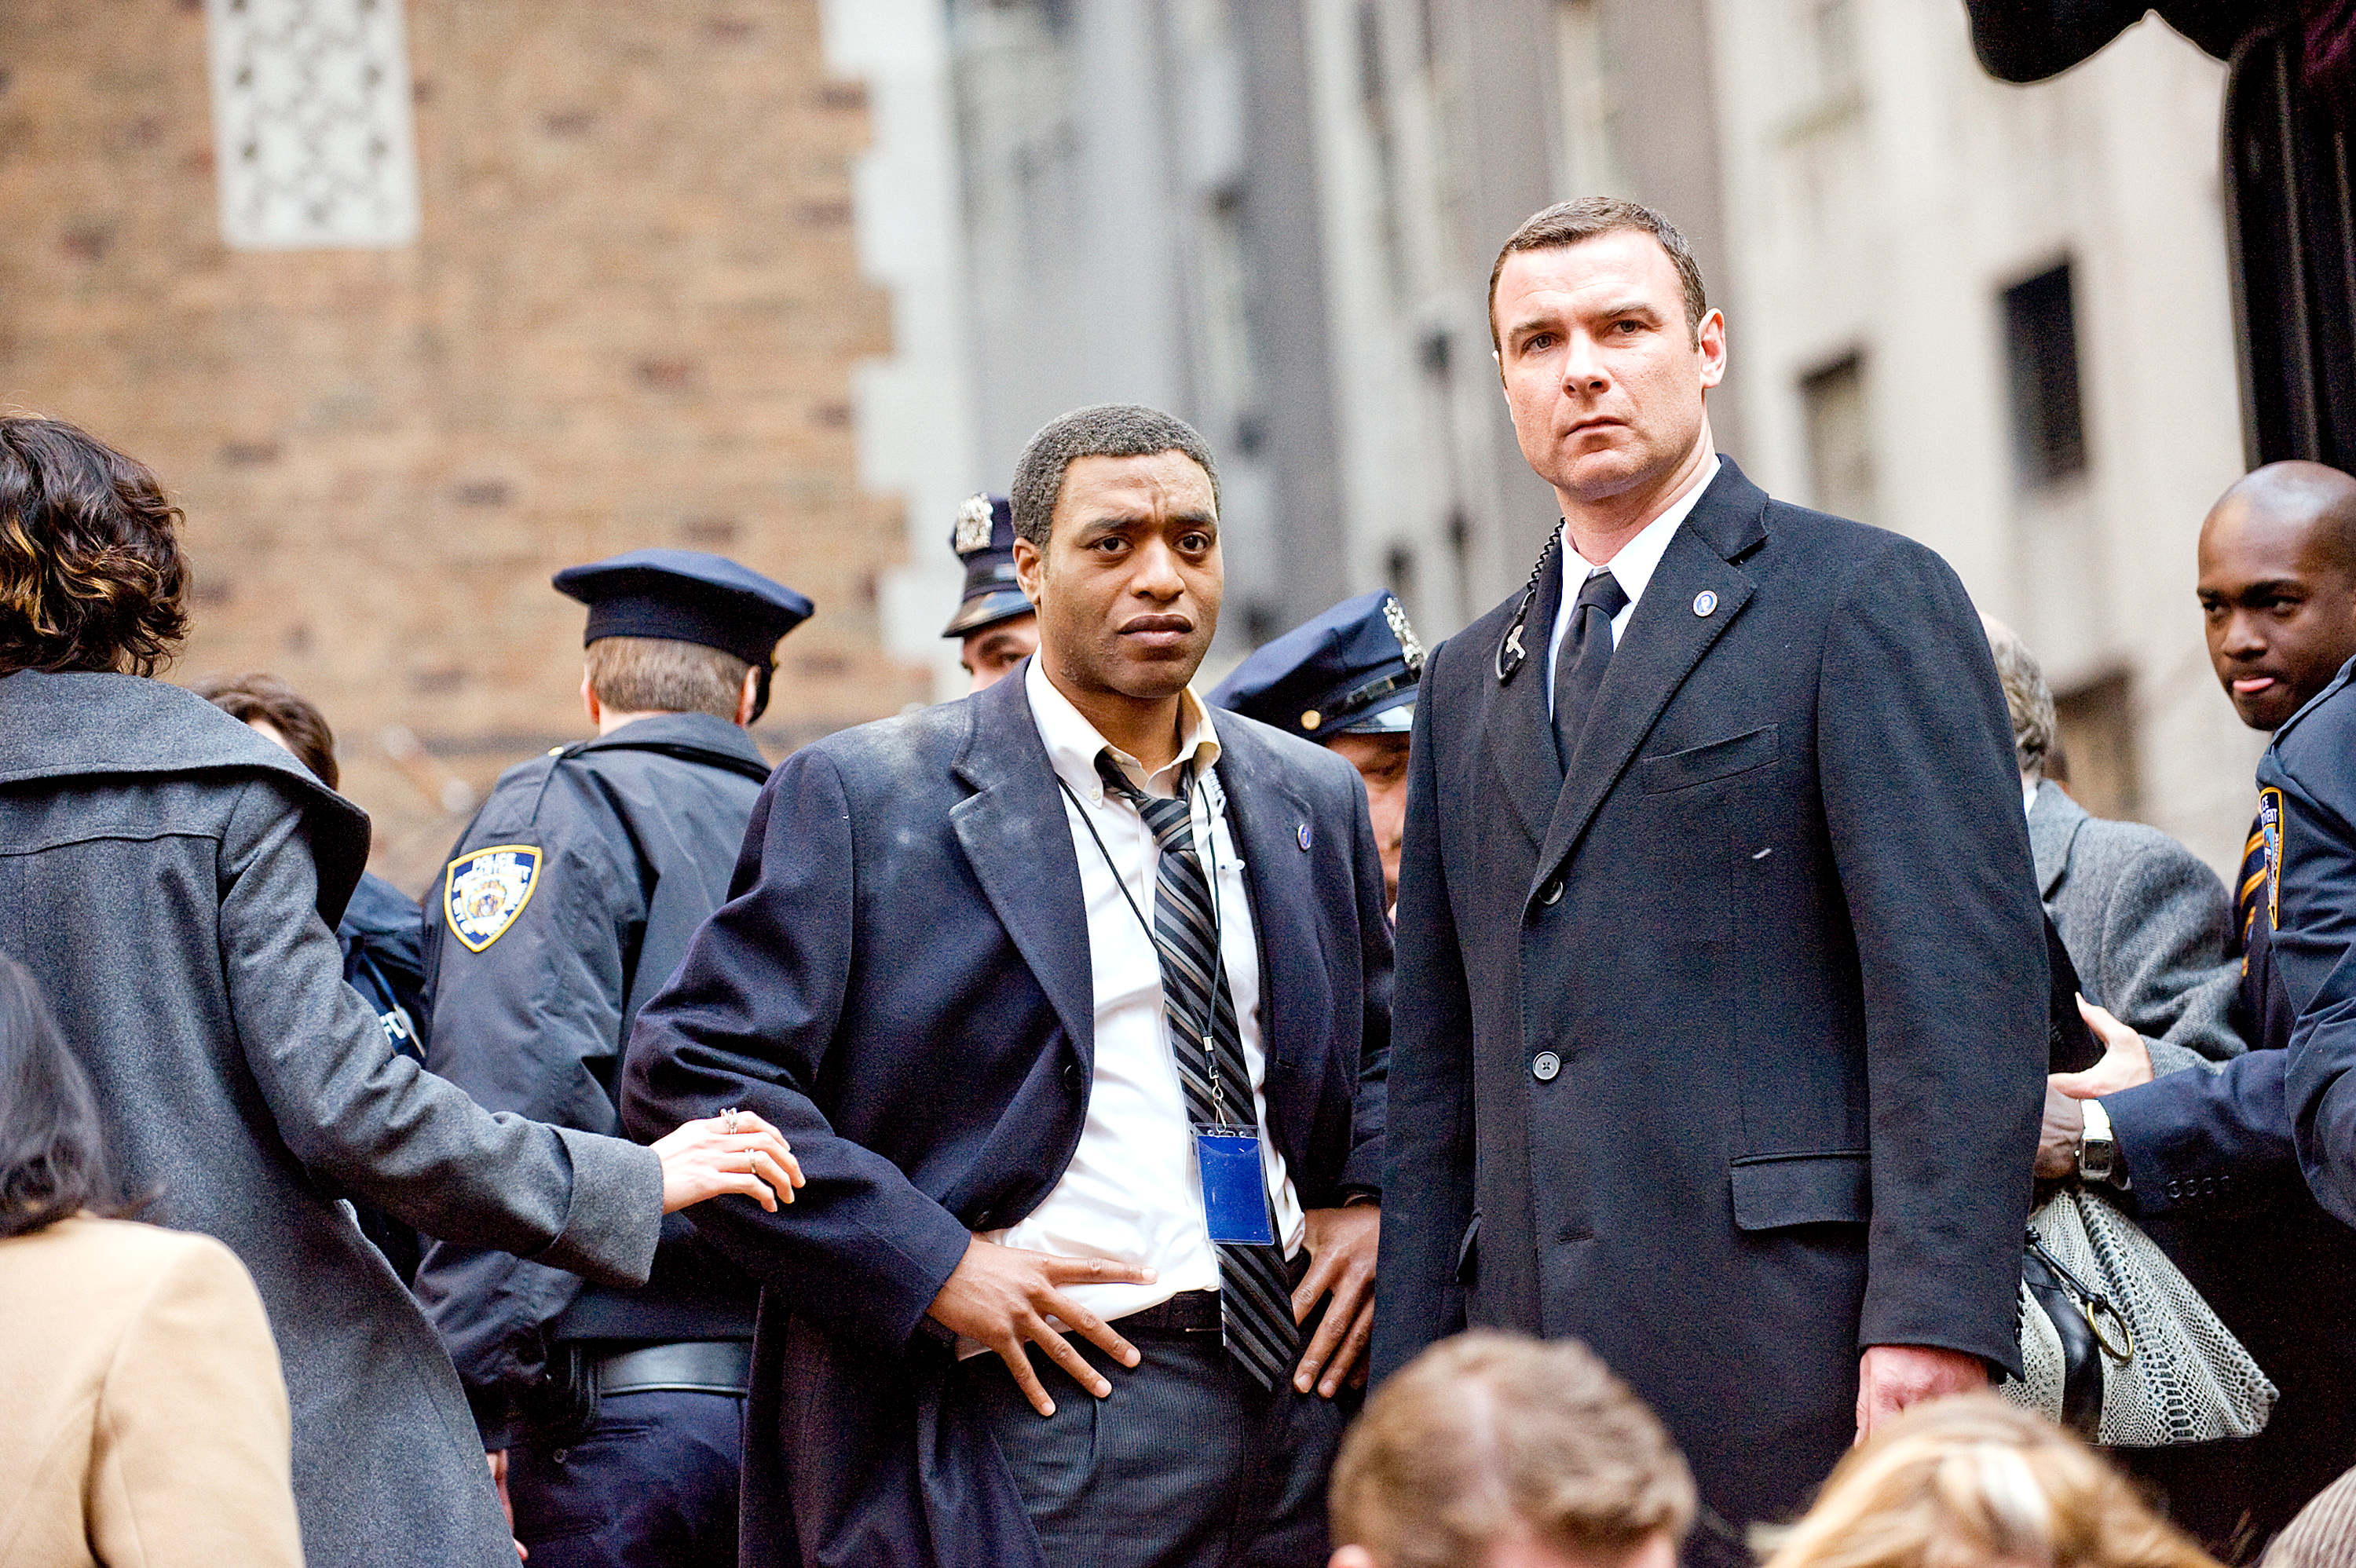  Chiwetel Ejiofor stars as Peabody and Liev Schreiber stars as Winter in Sony Pictures' &quot;Salt&quot;.